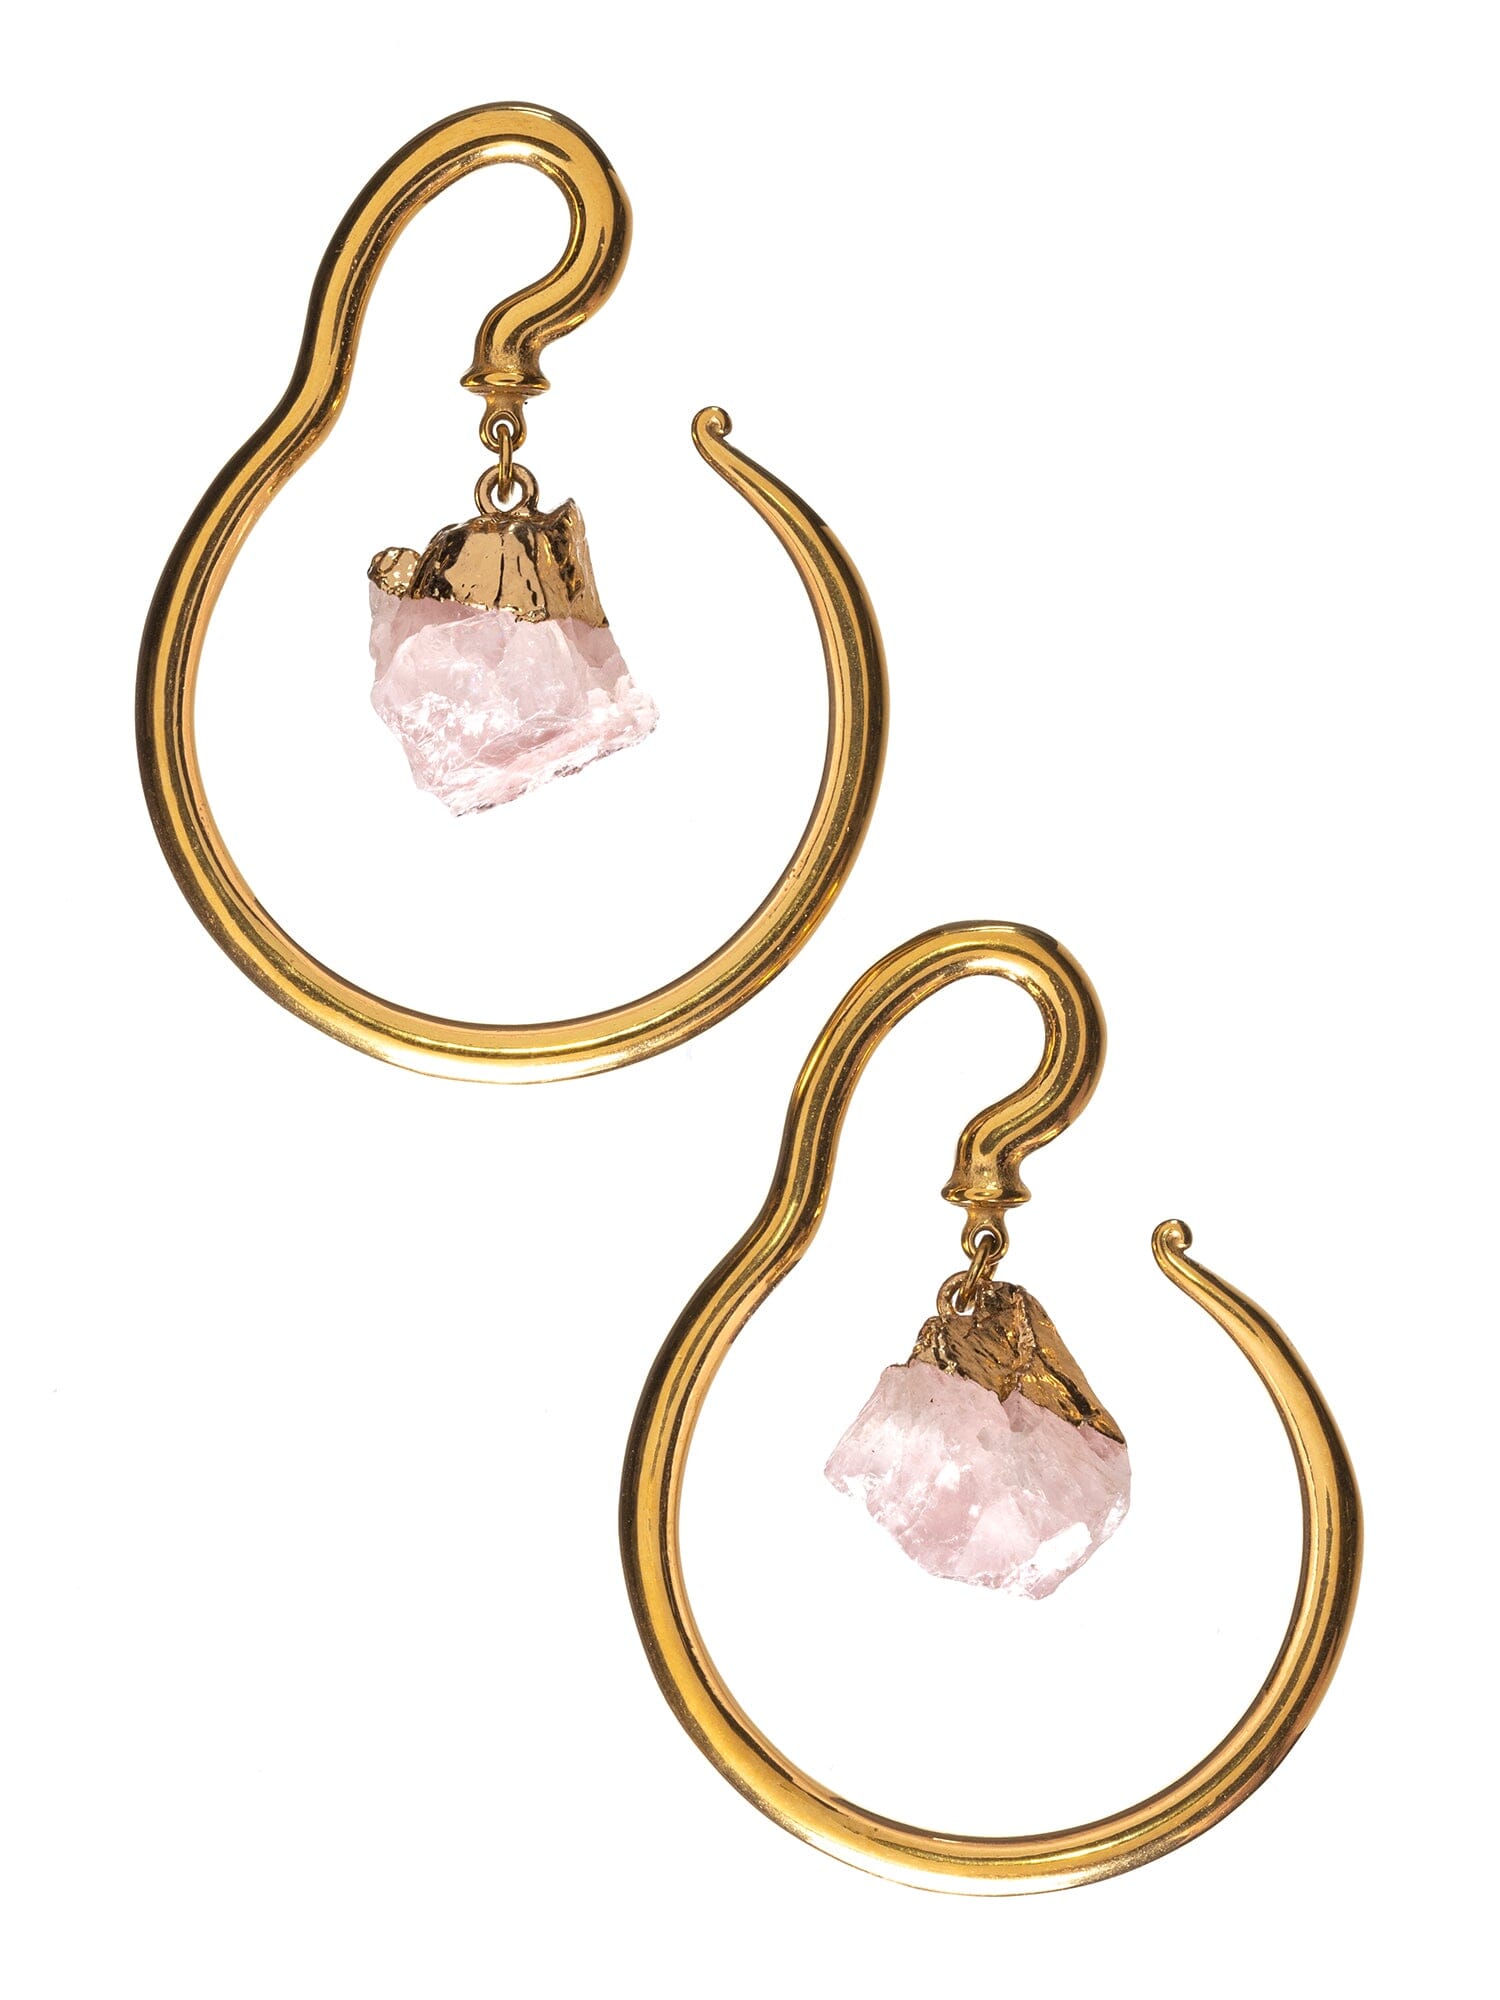 Thin Hook with Rose Quartz Small Stone Dangle Steel Hangers